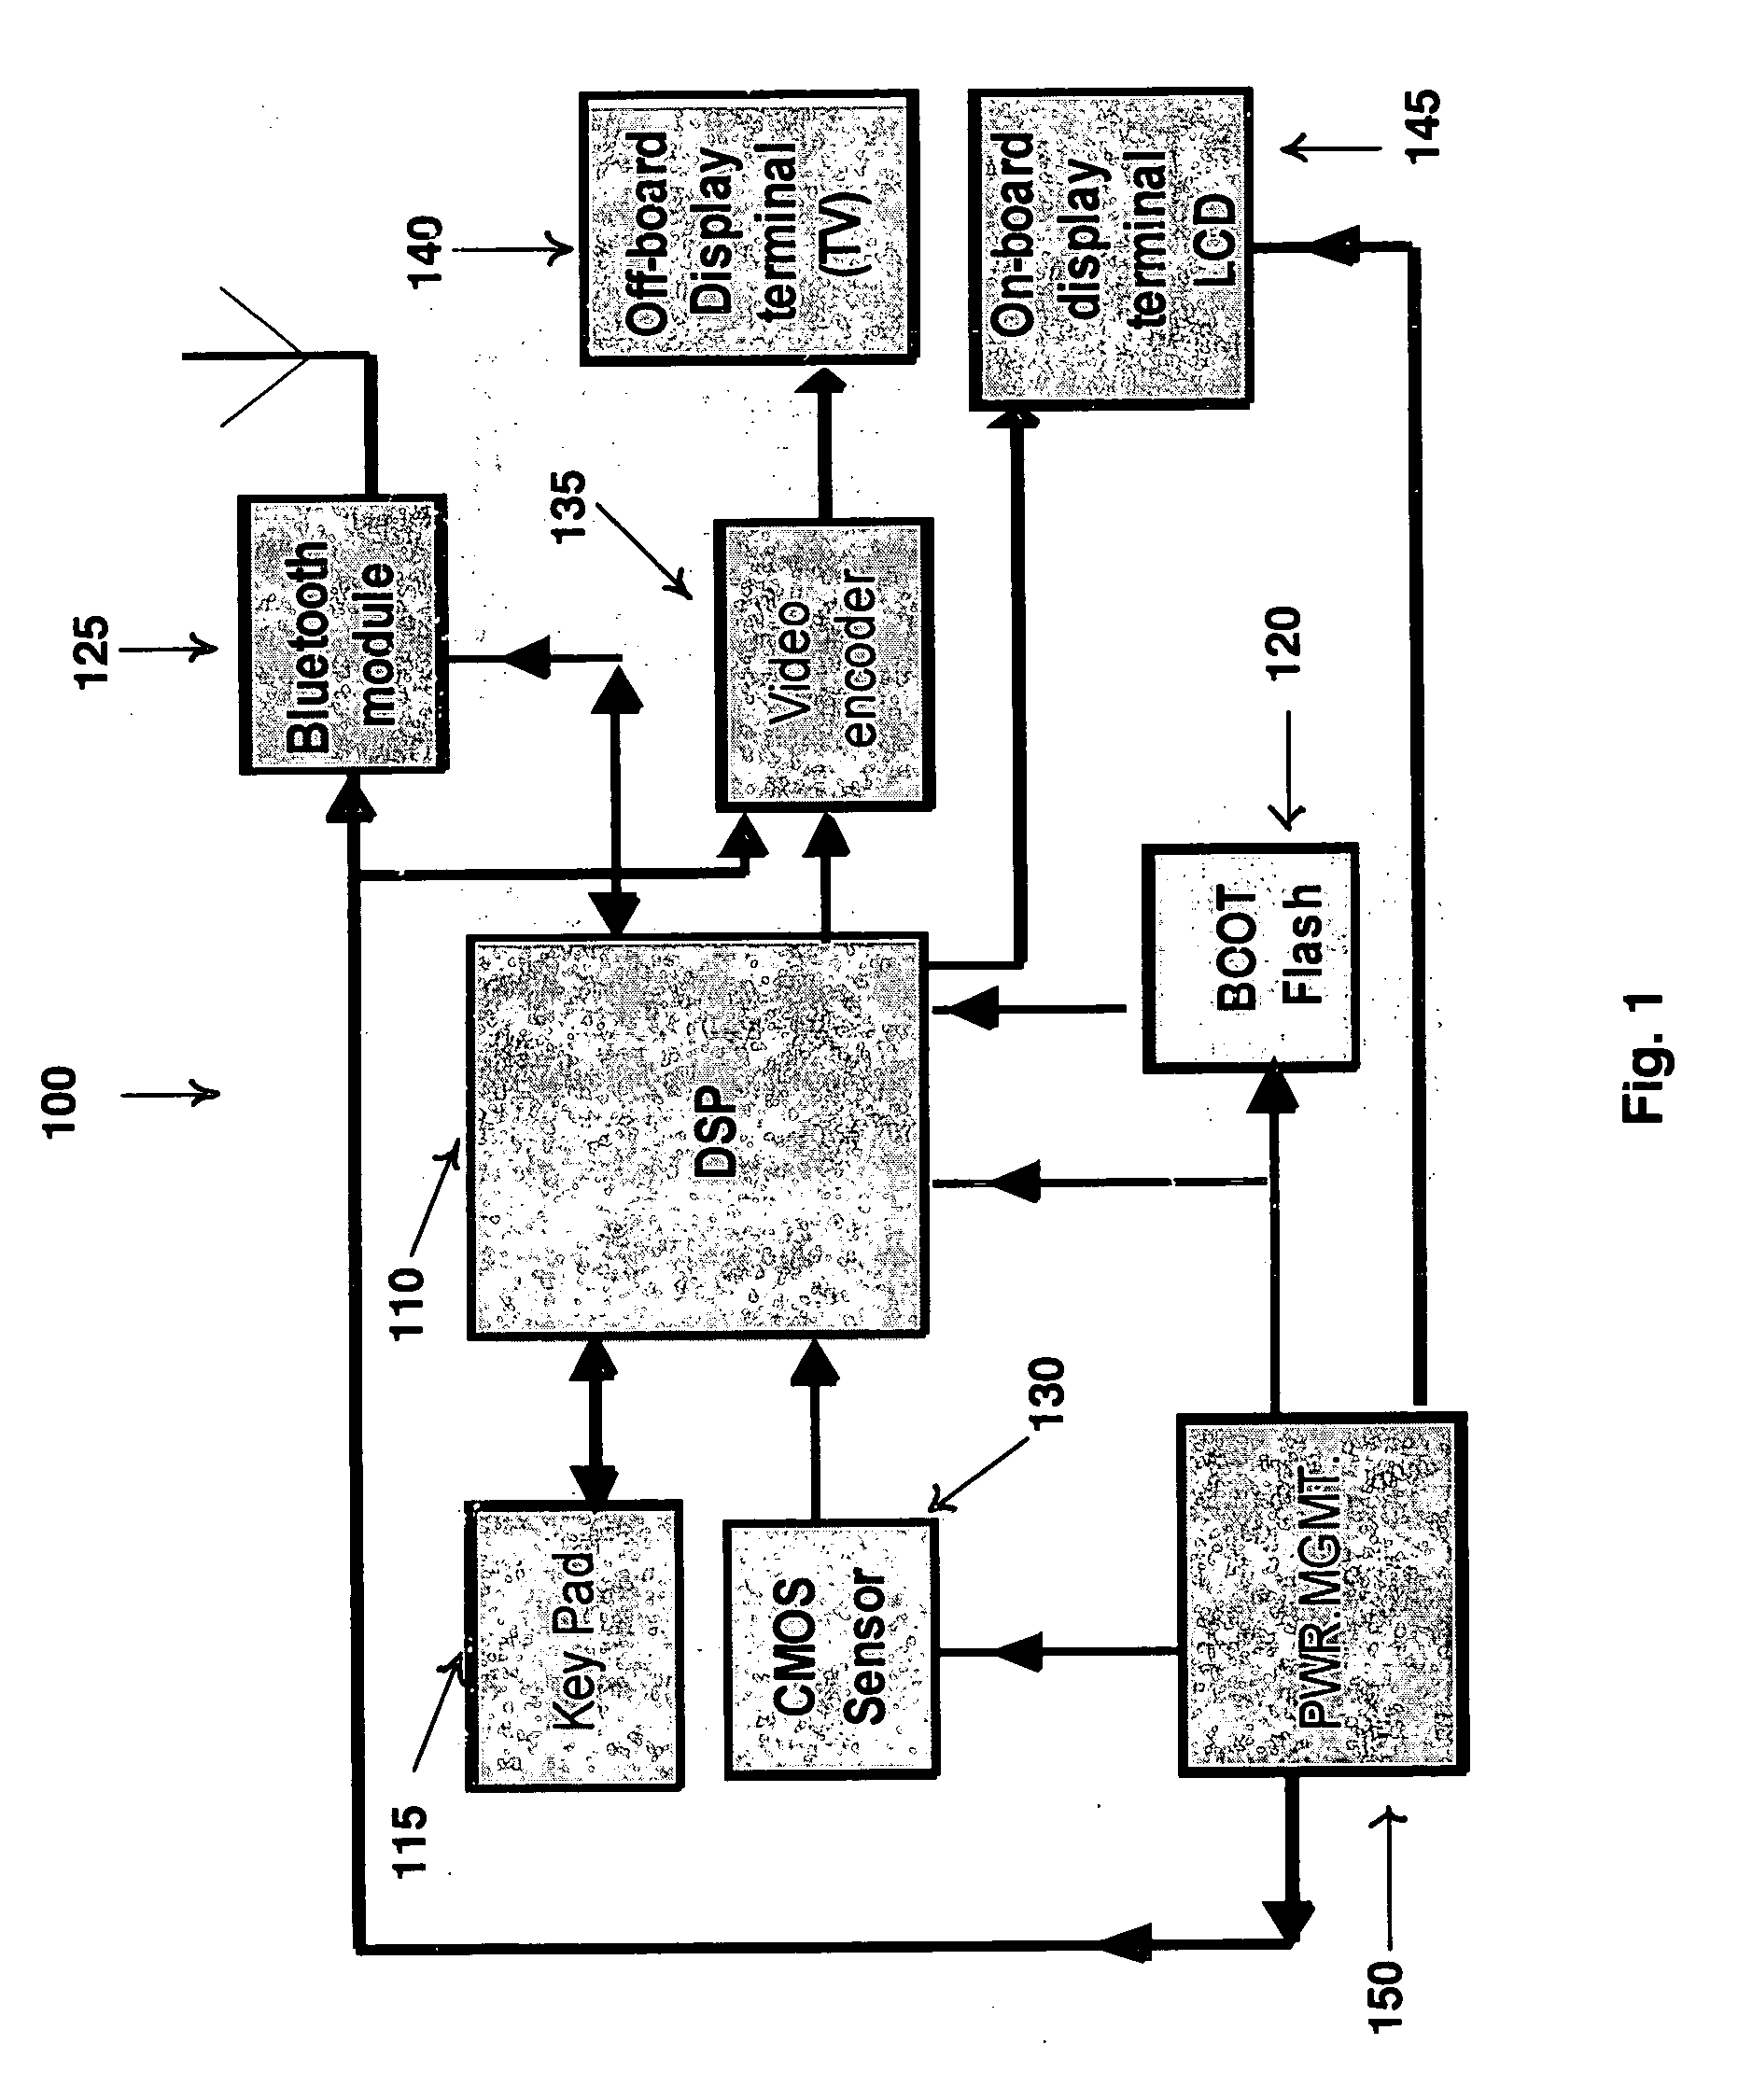 Device and software for screening the skin